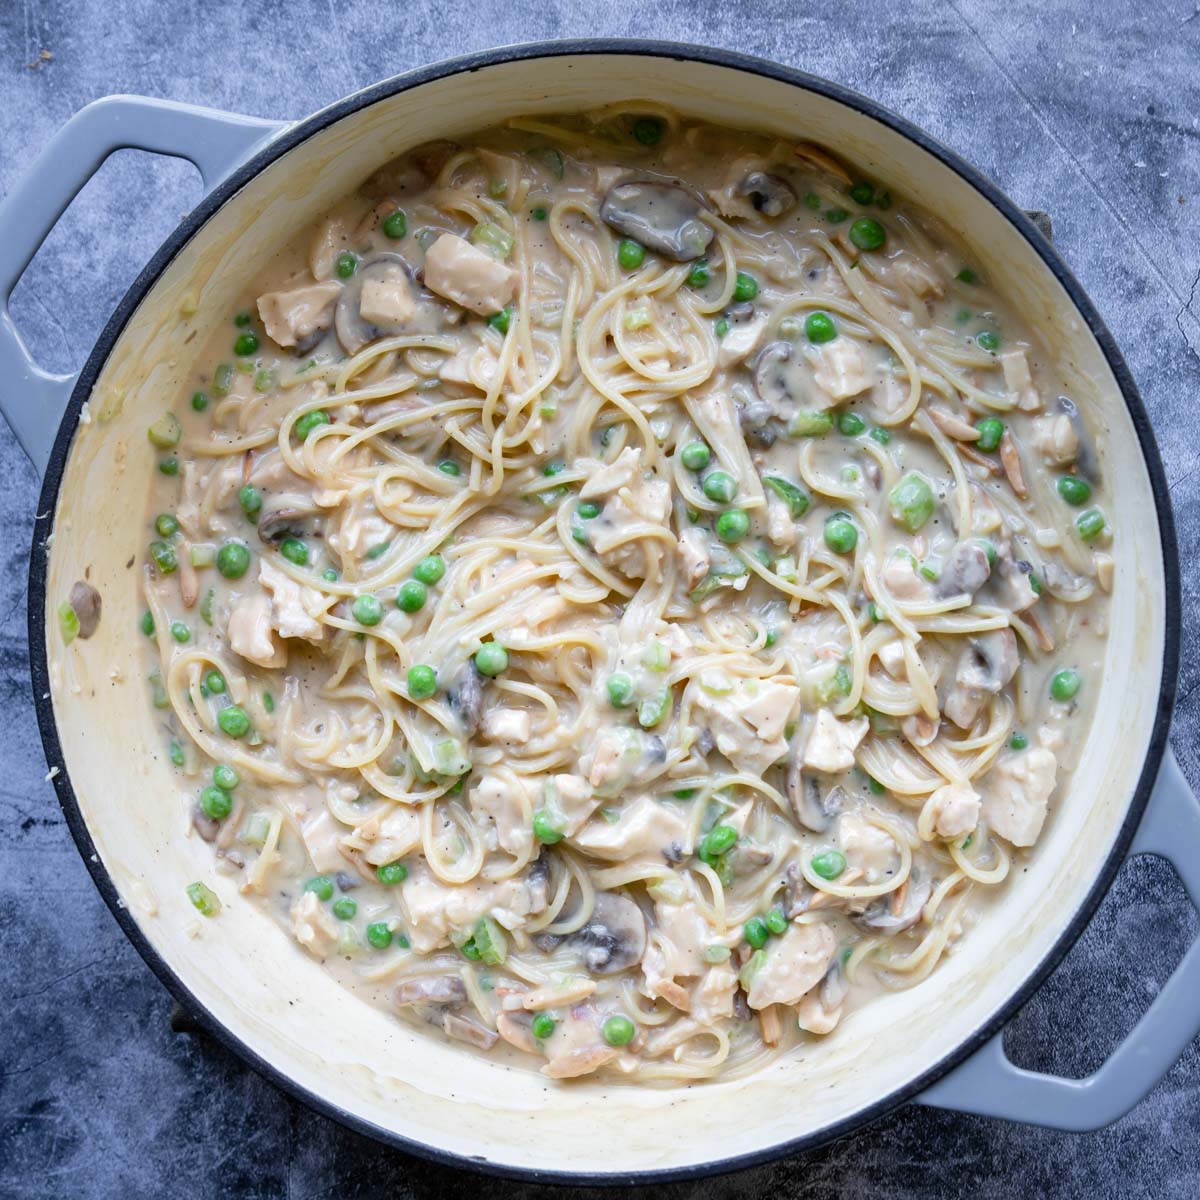 spaghetti, chicken and almonds in a cream sauce with peas and mushrooms